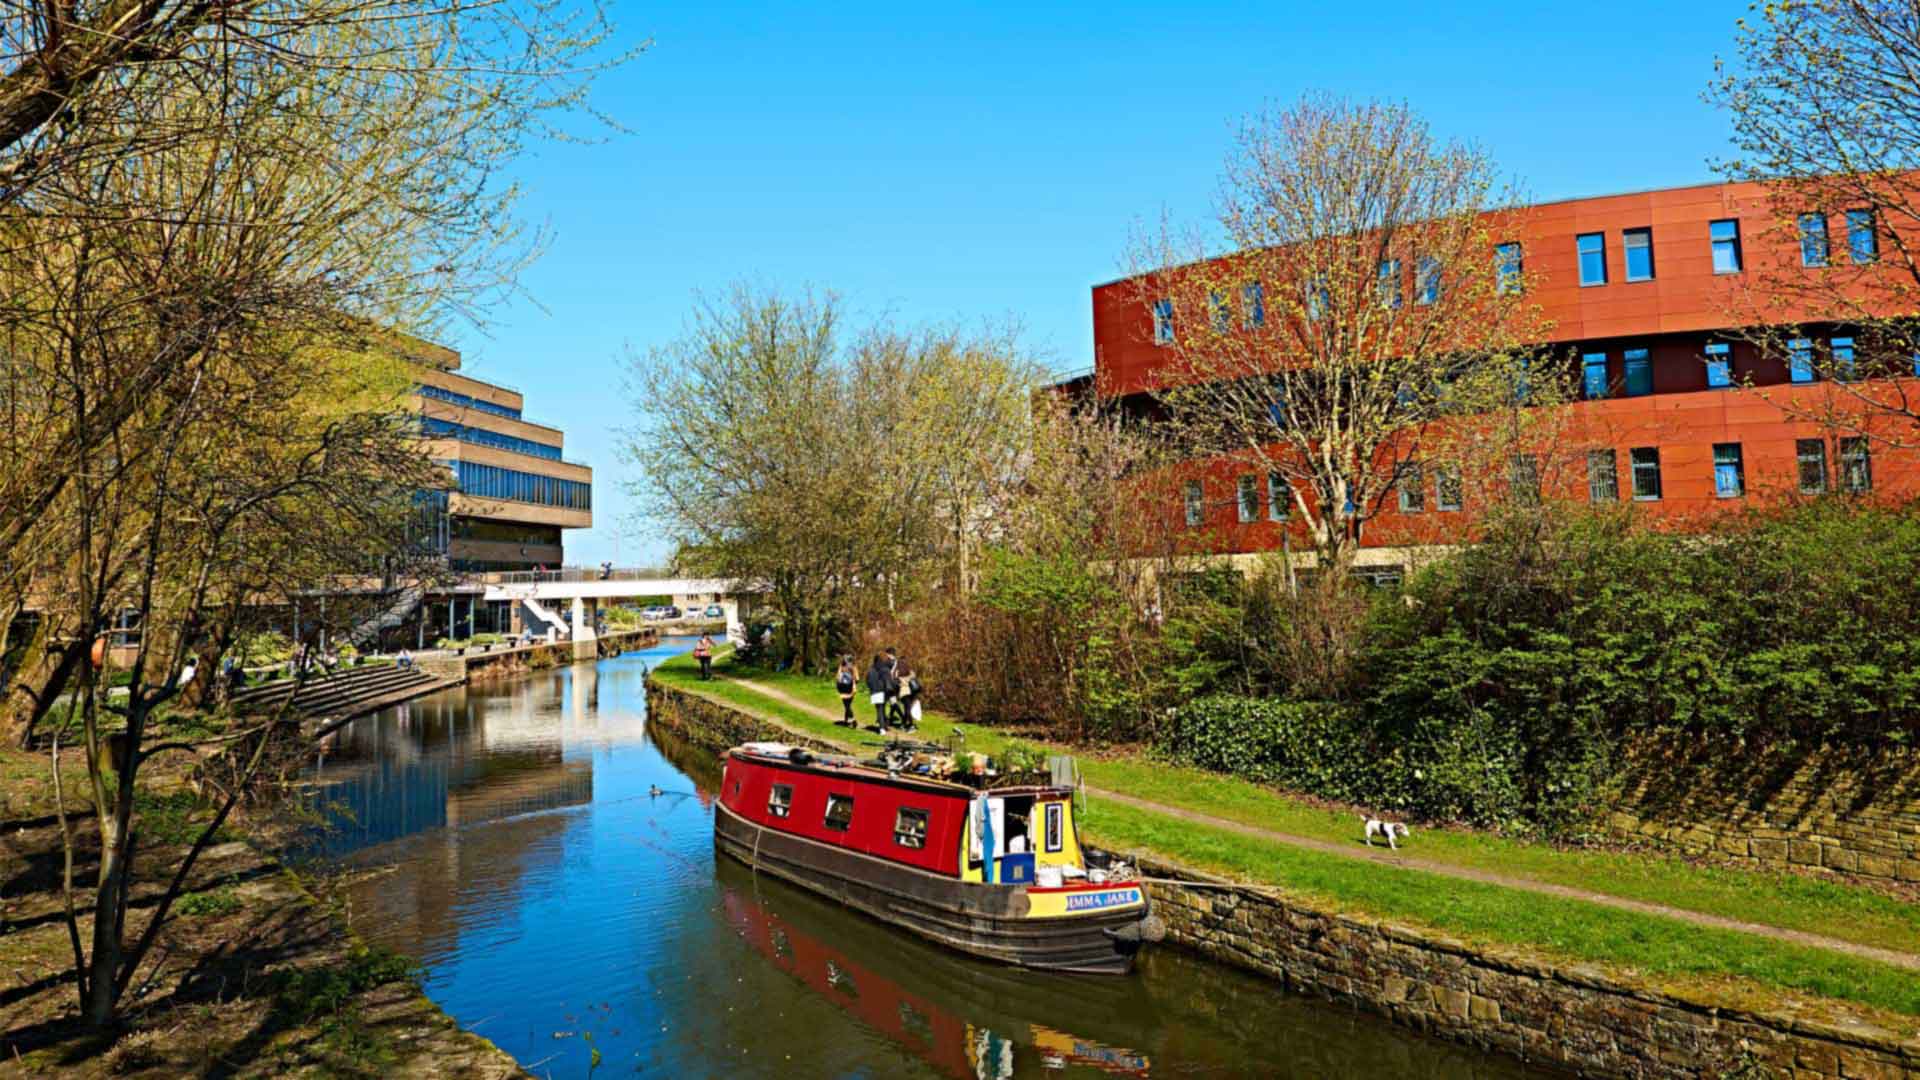 Picture of the canal by the business school. A red narrowboat is sat on the canal.